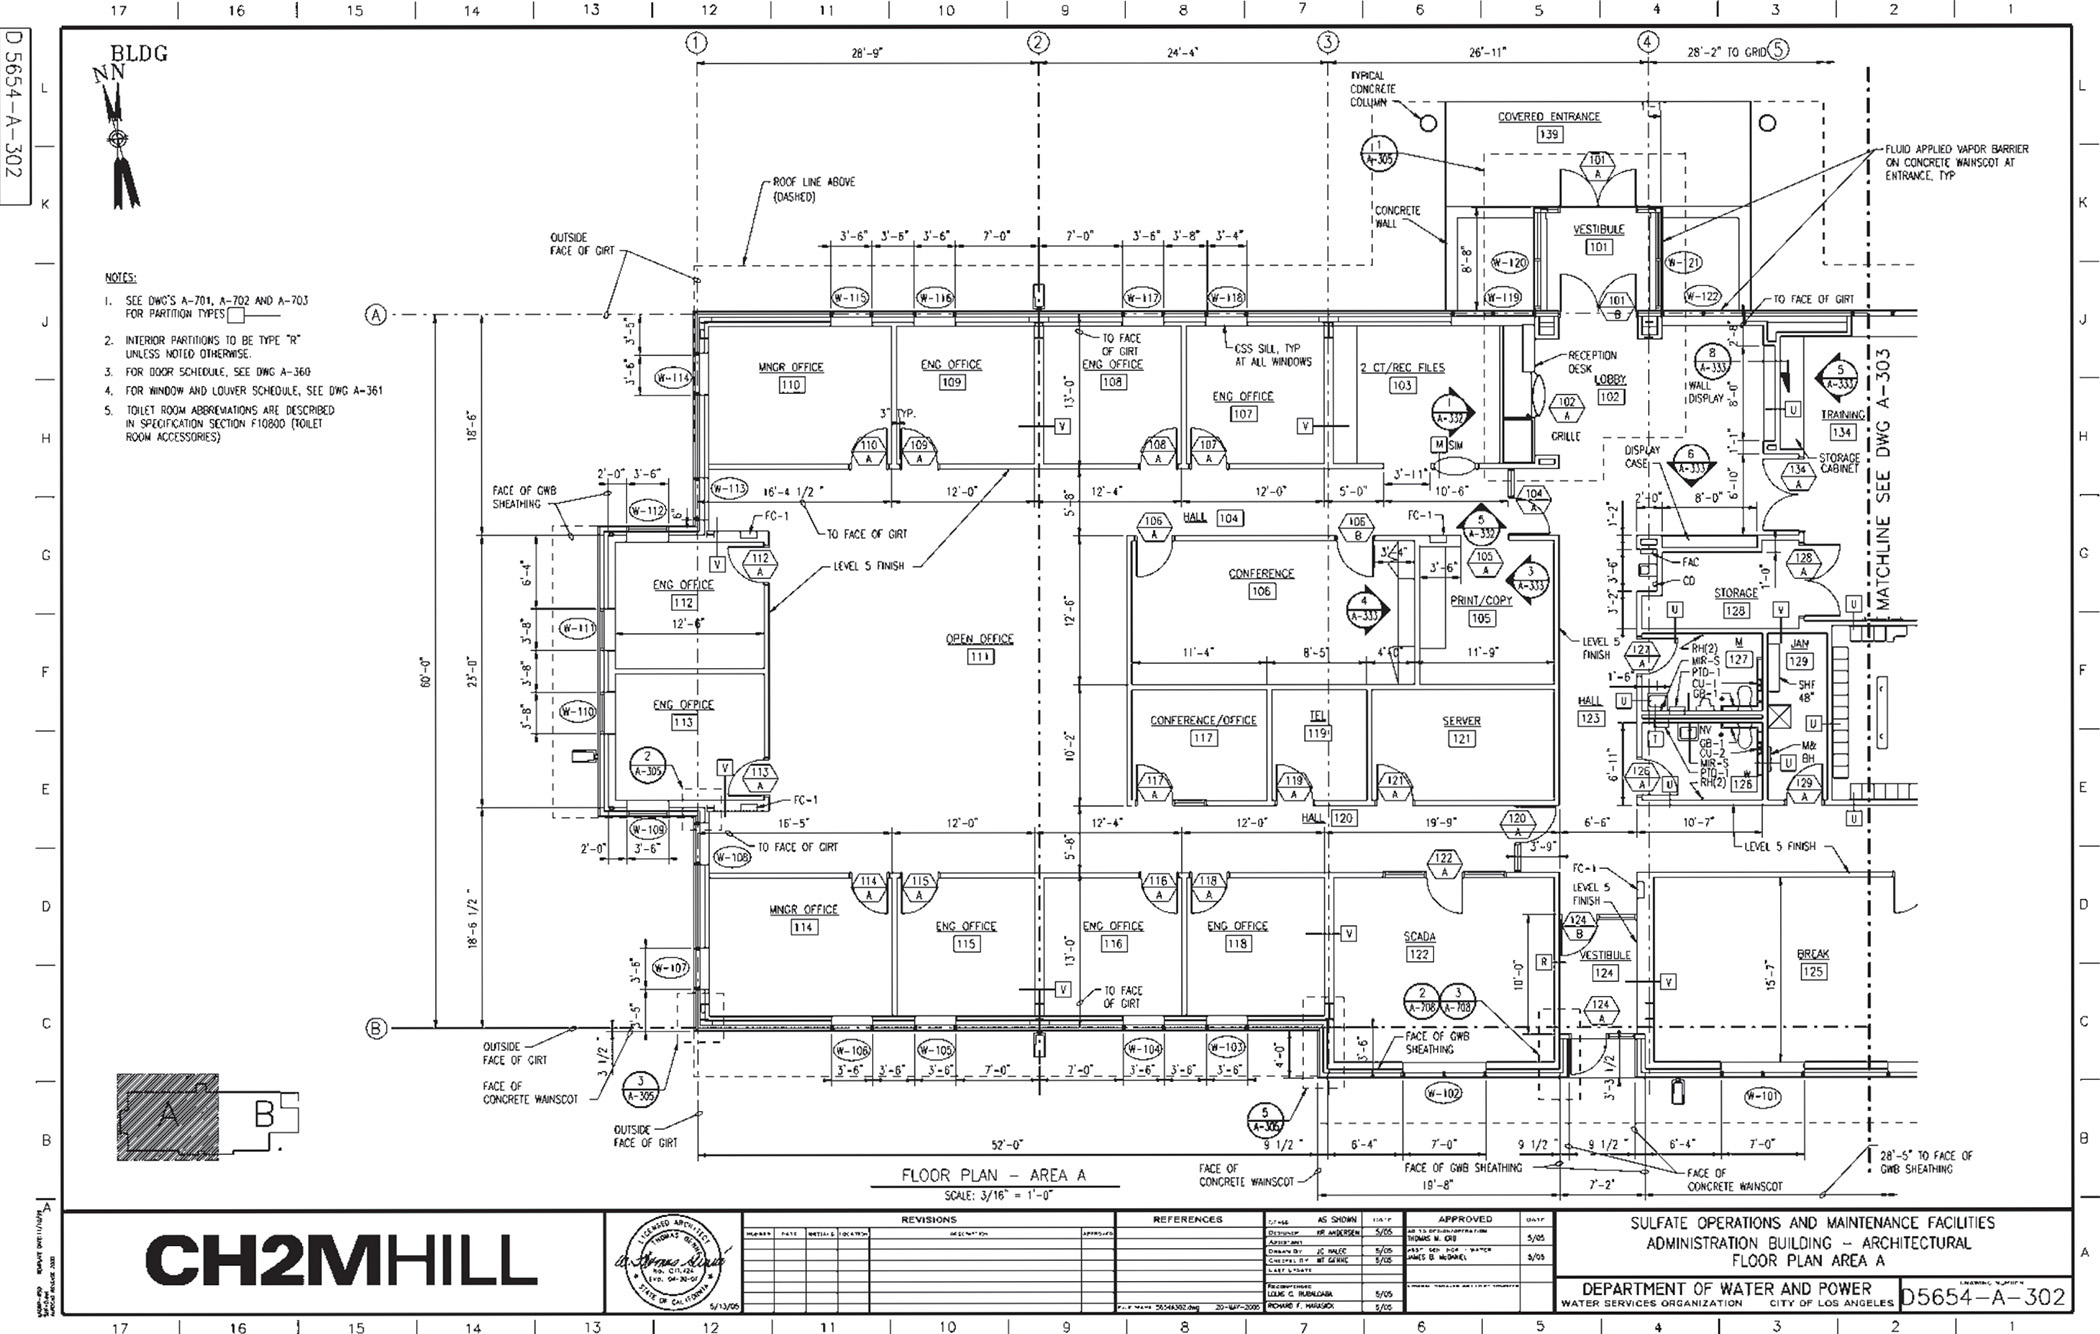 A floor plan drawing is shown.